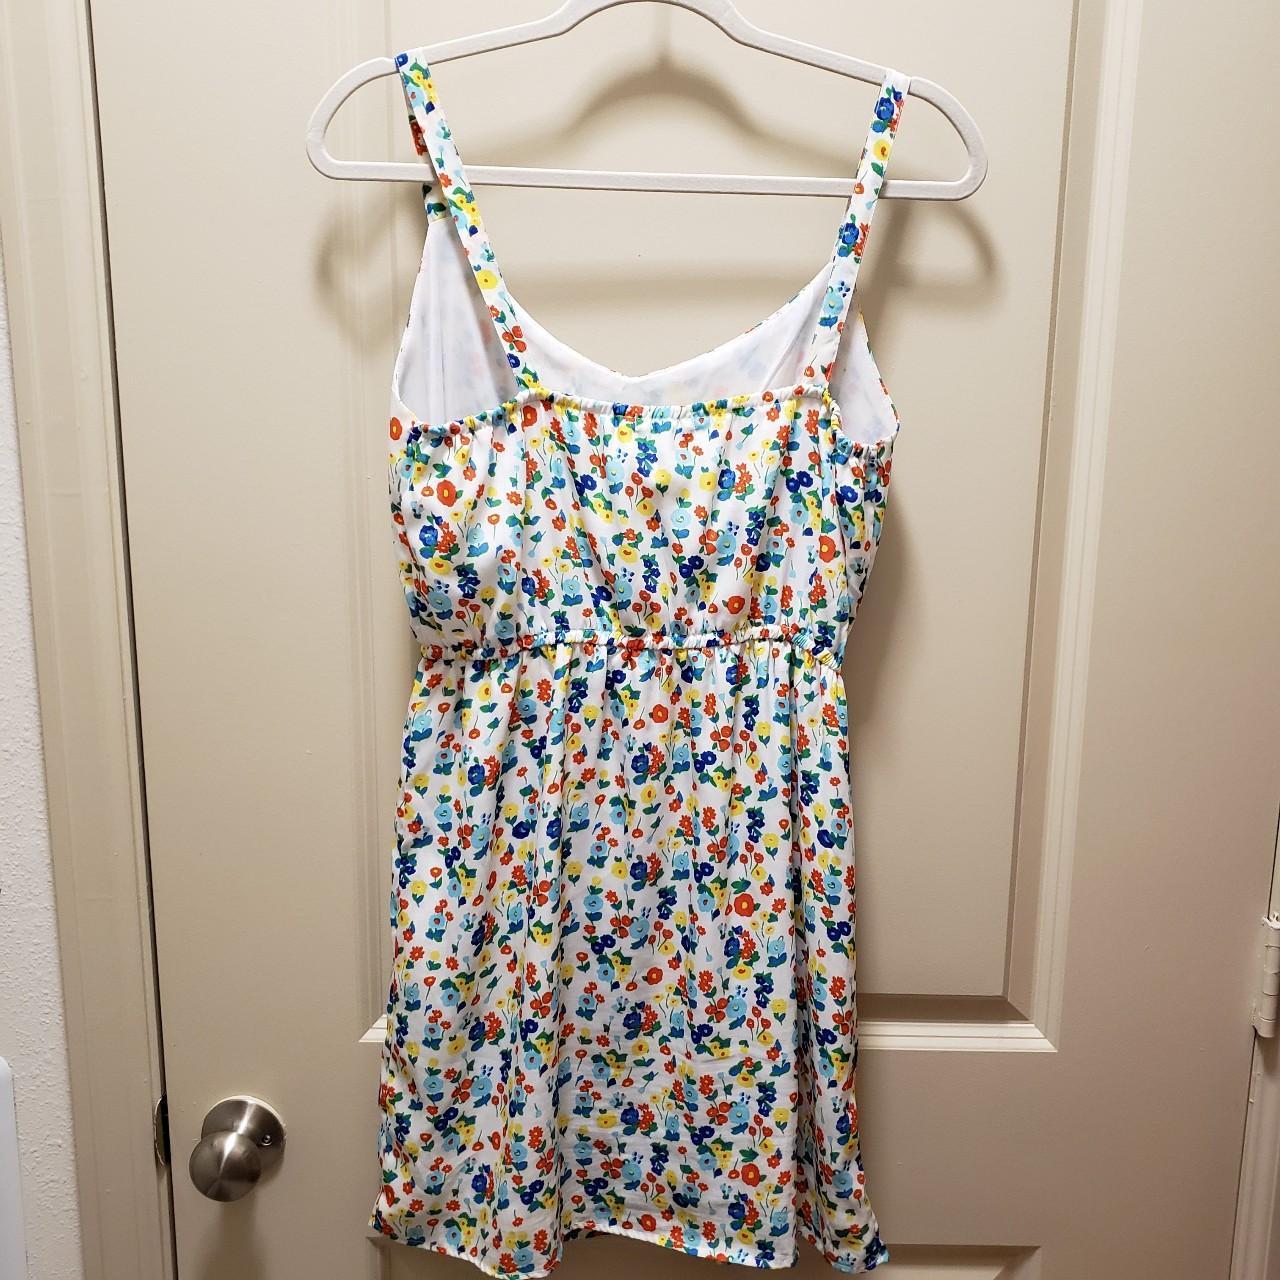 Product Image 2 - Multicolor floral sundress from BeBop